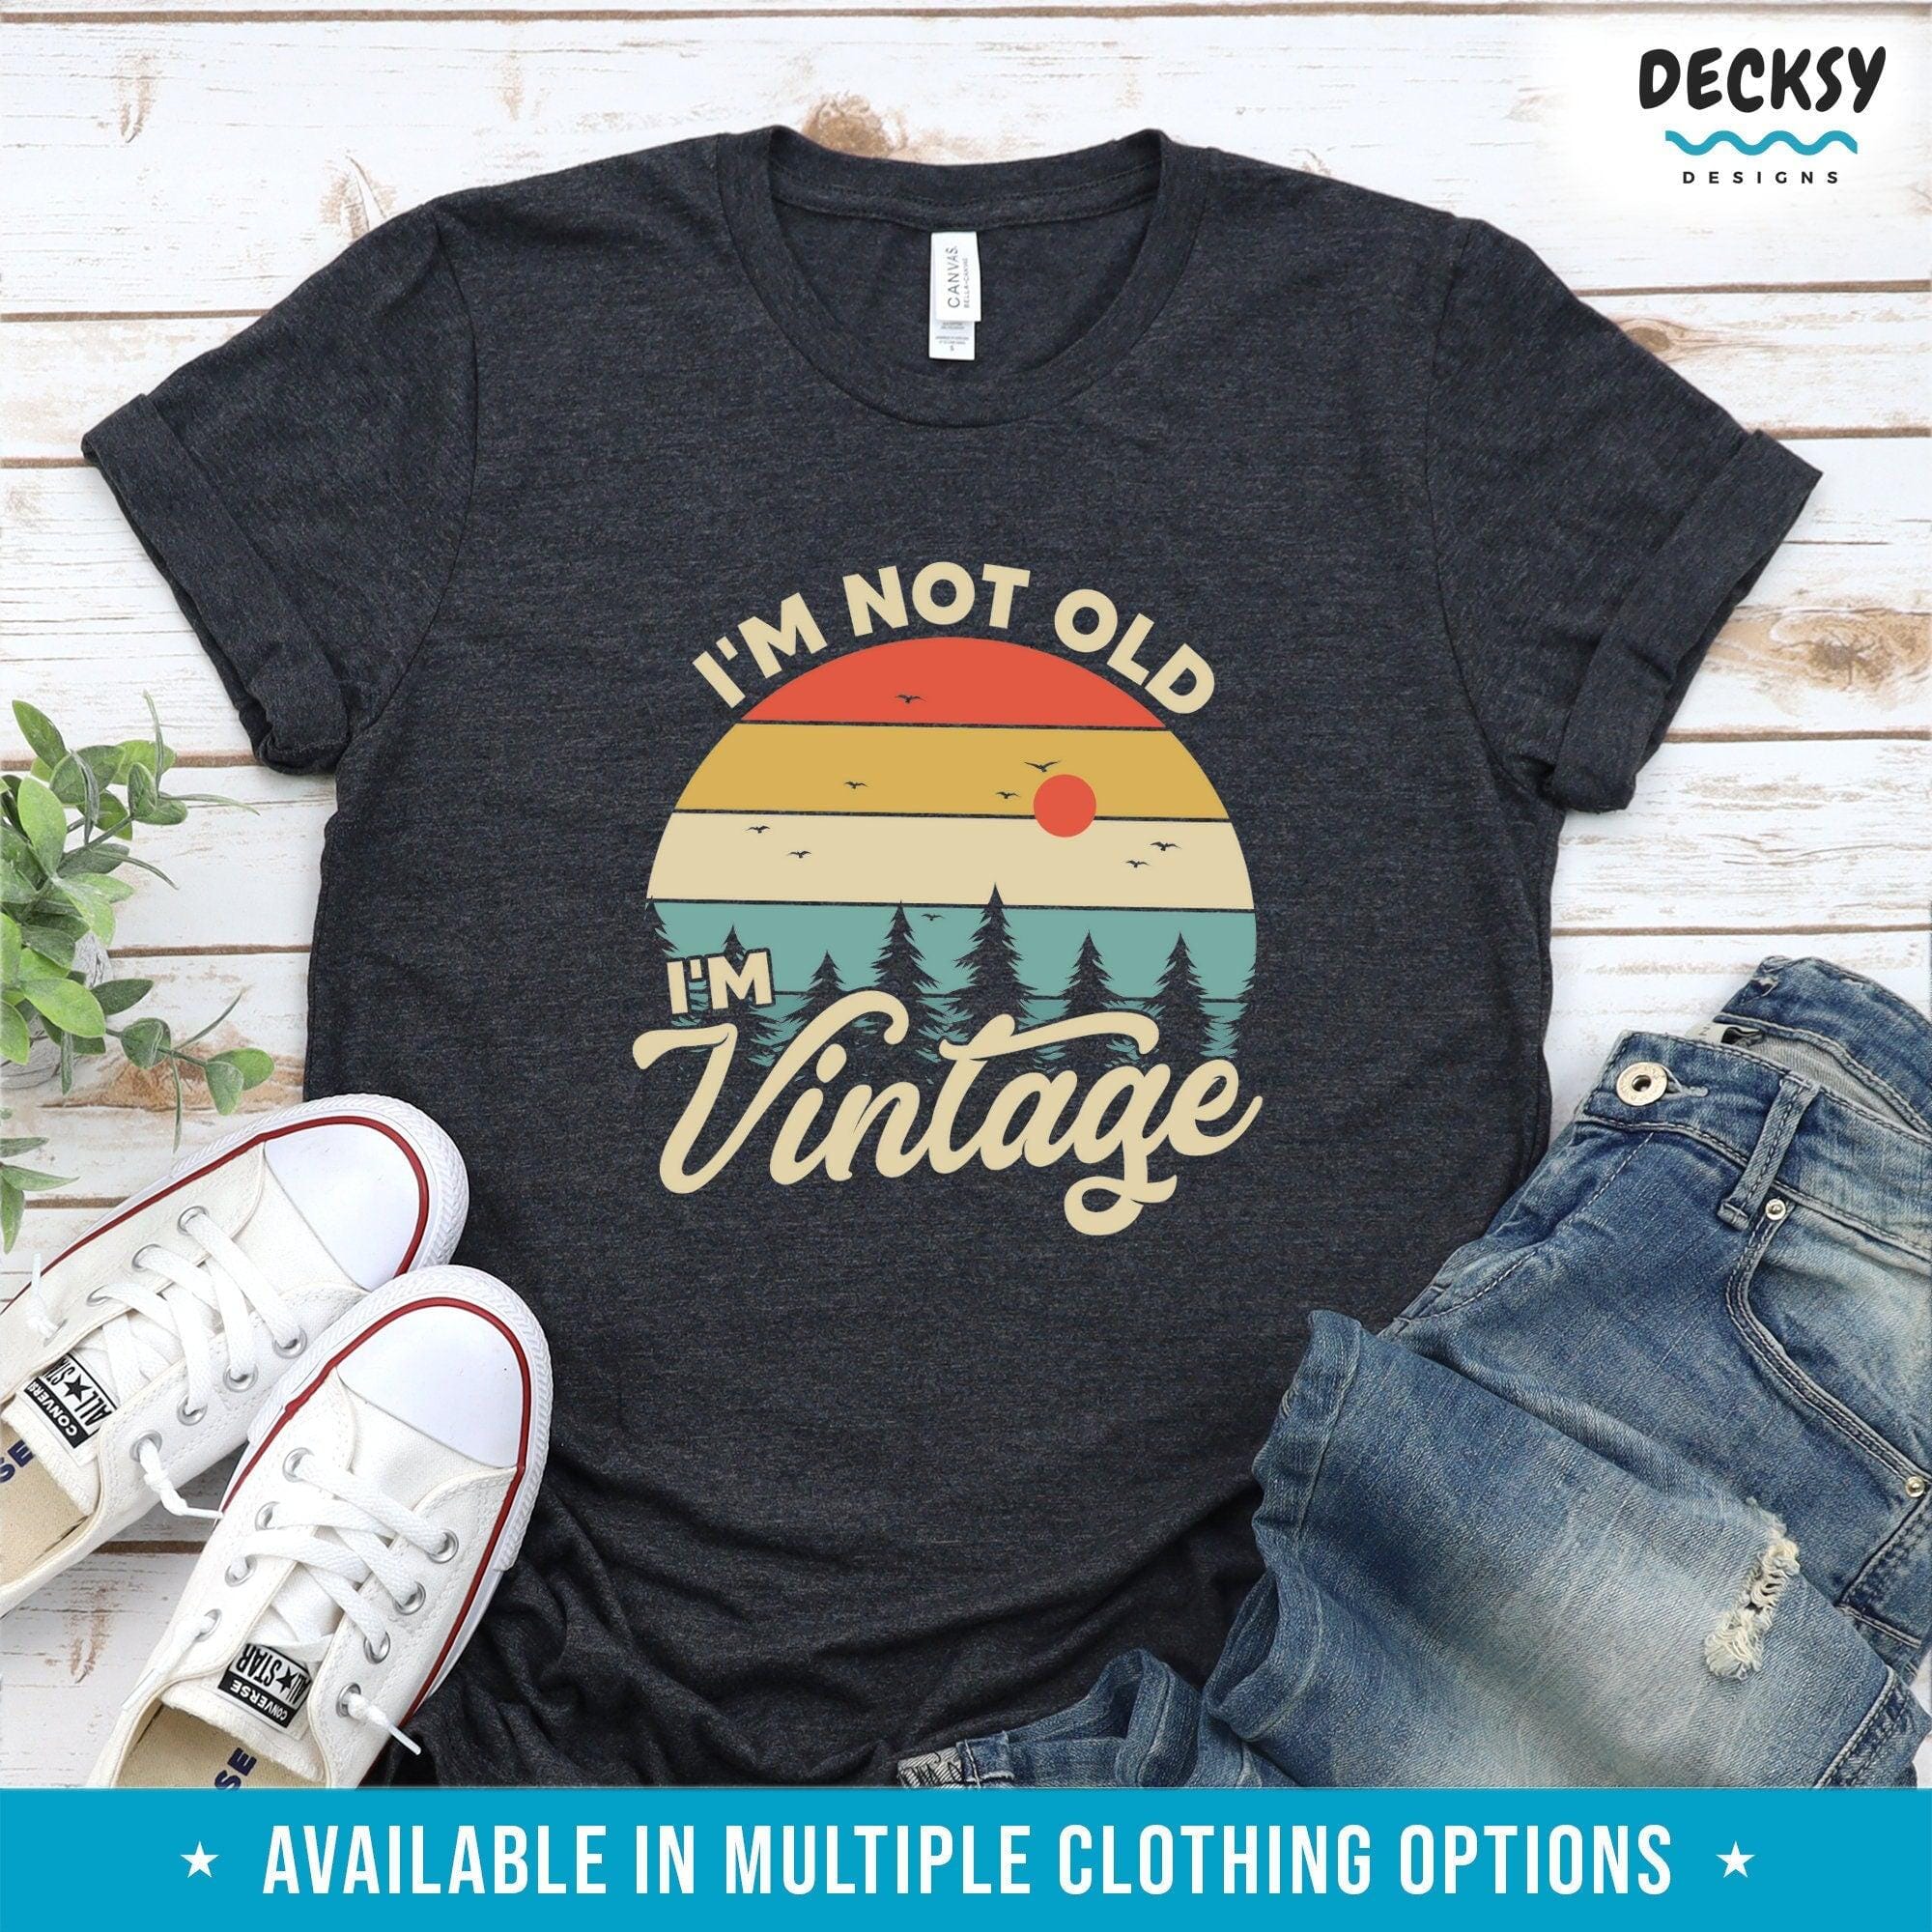 Retro Birthday Shirt Gift-Clothing:Gender-Neutral Adult Clothing:Tops & Tees:T-shirts:Graphic Tees-DecksyDesigns